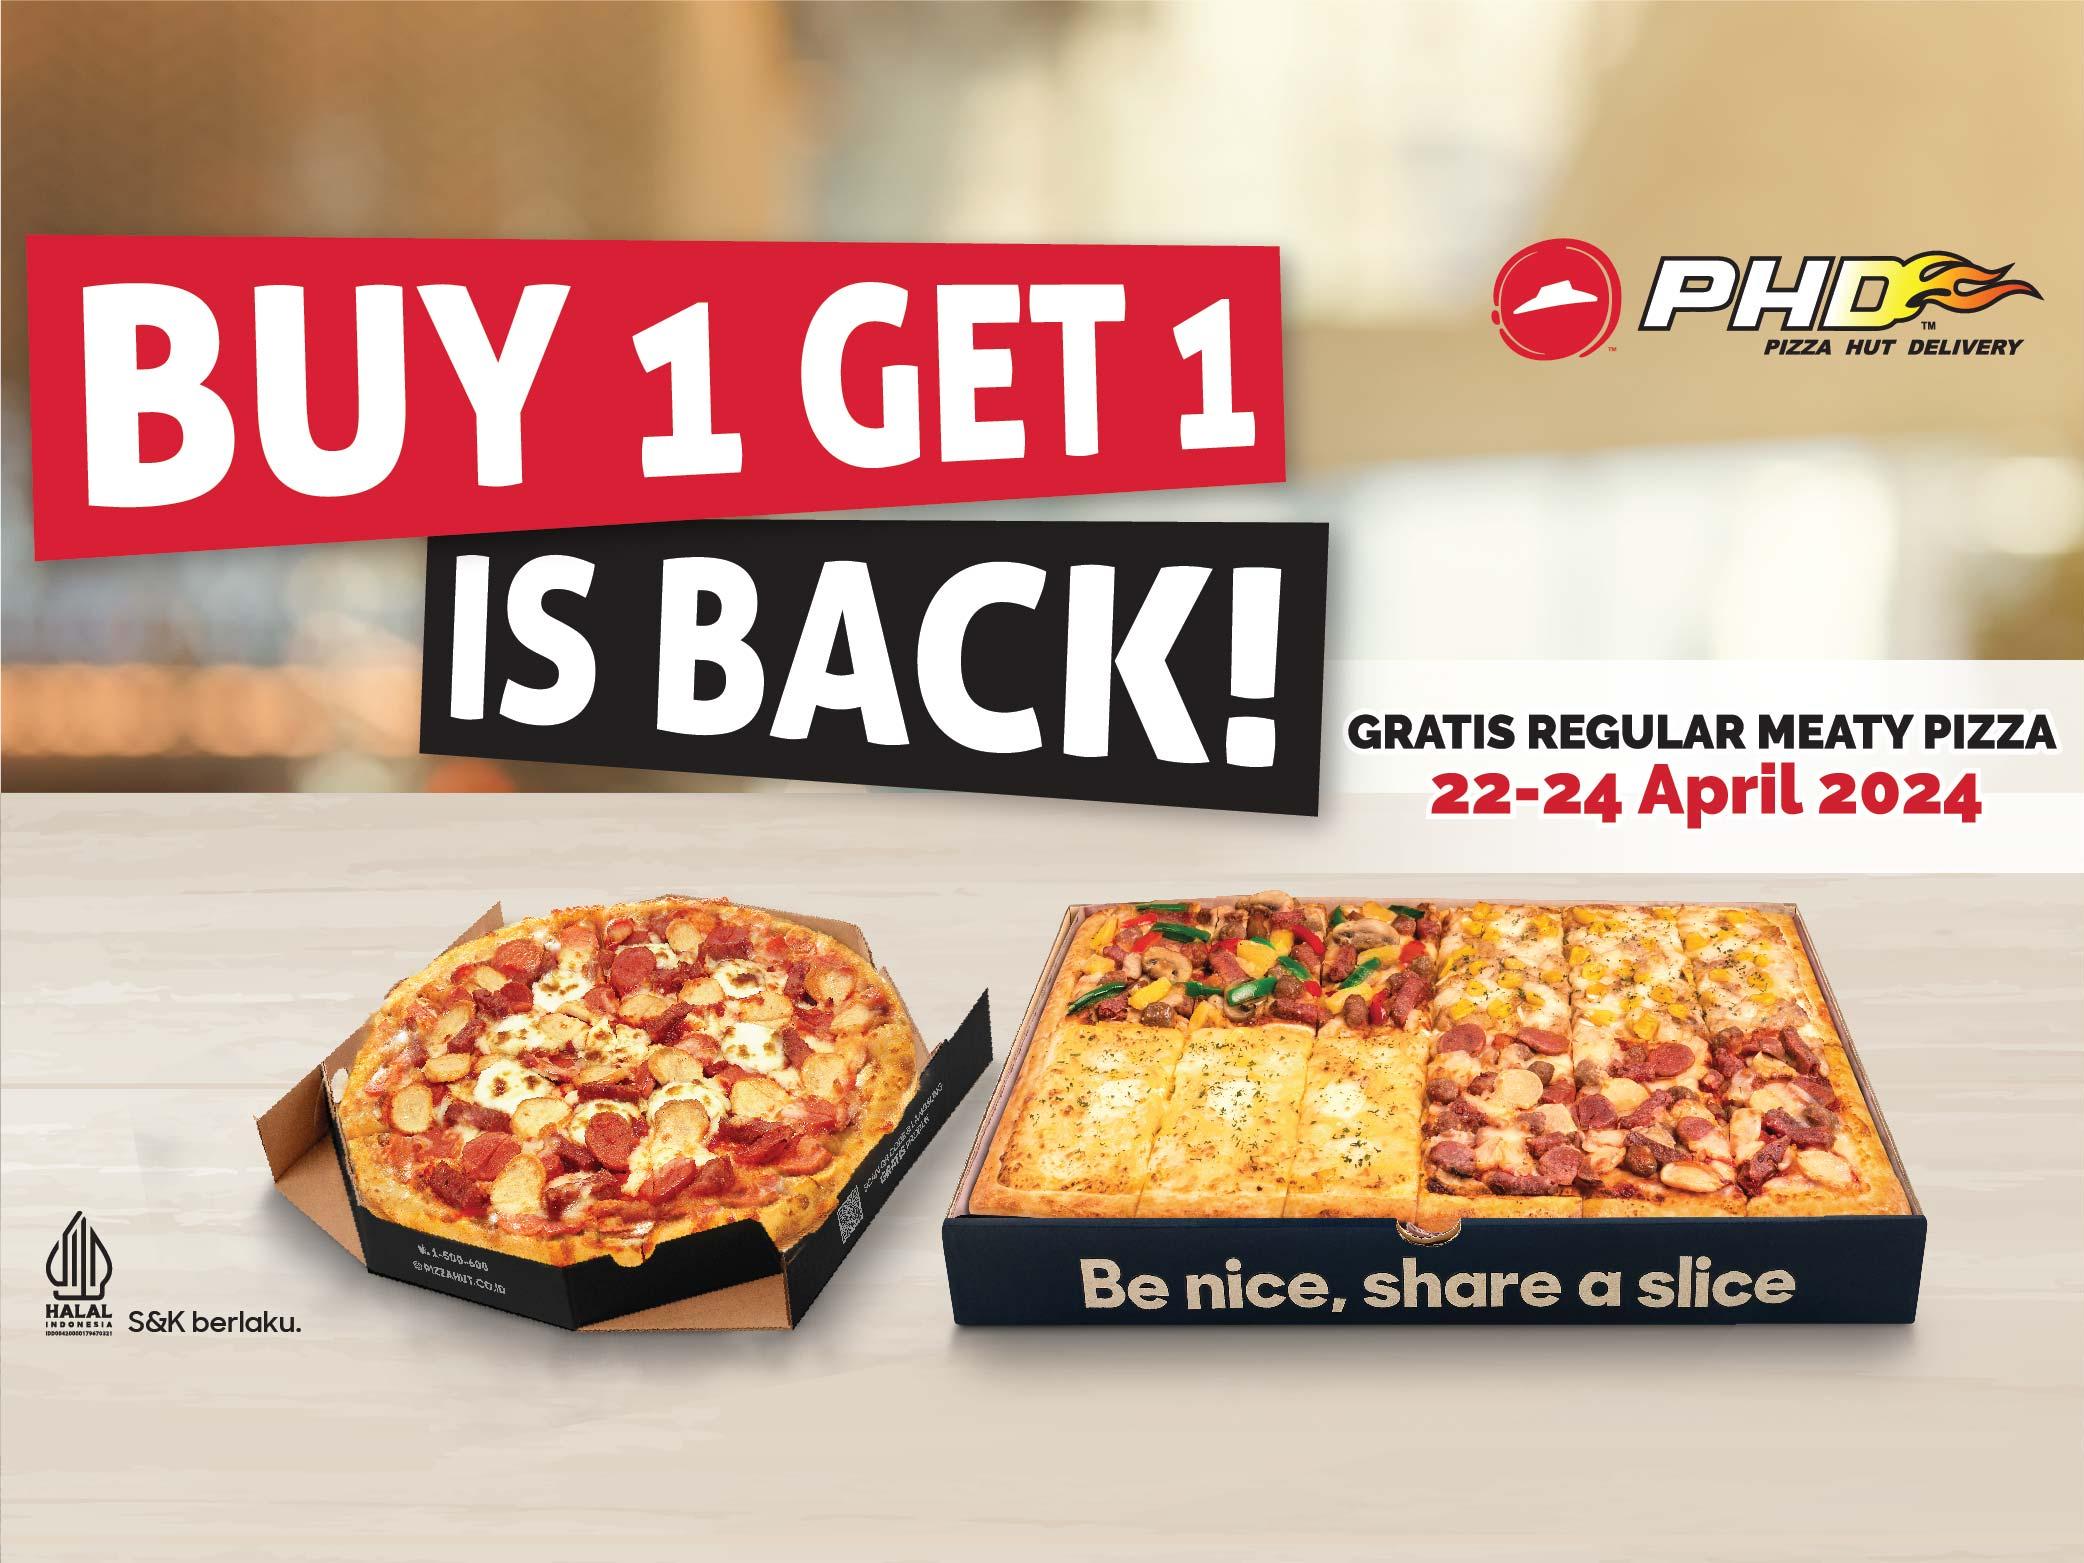 Pizza Hut Delivery - PHD, Palm Spring Batam